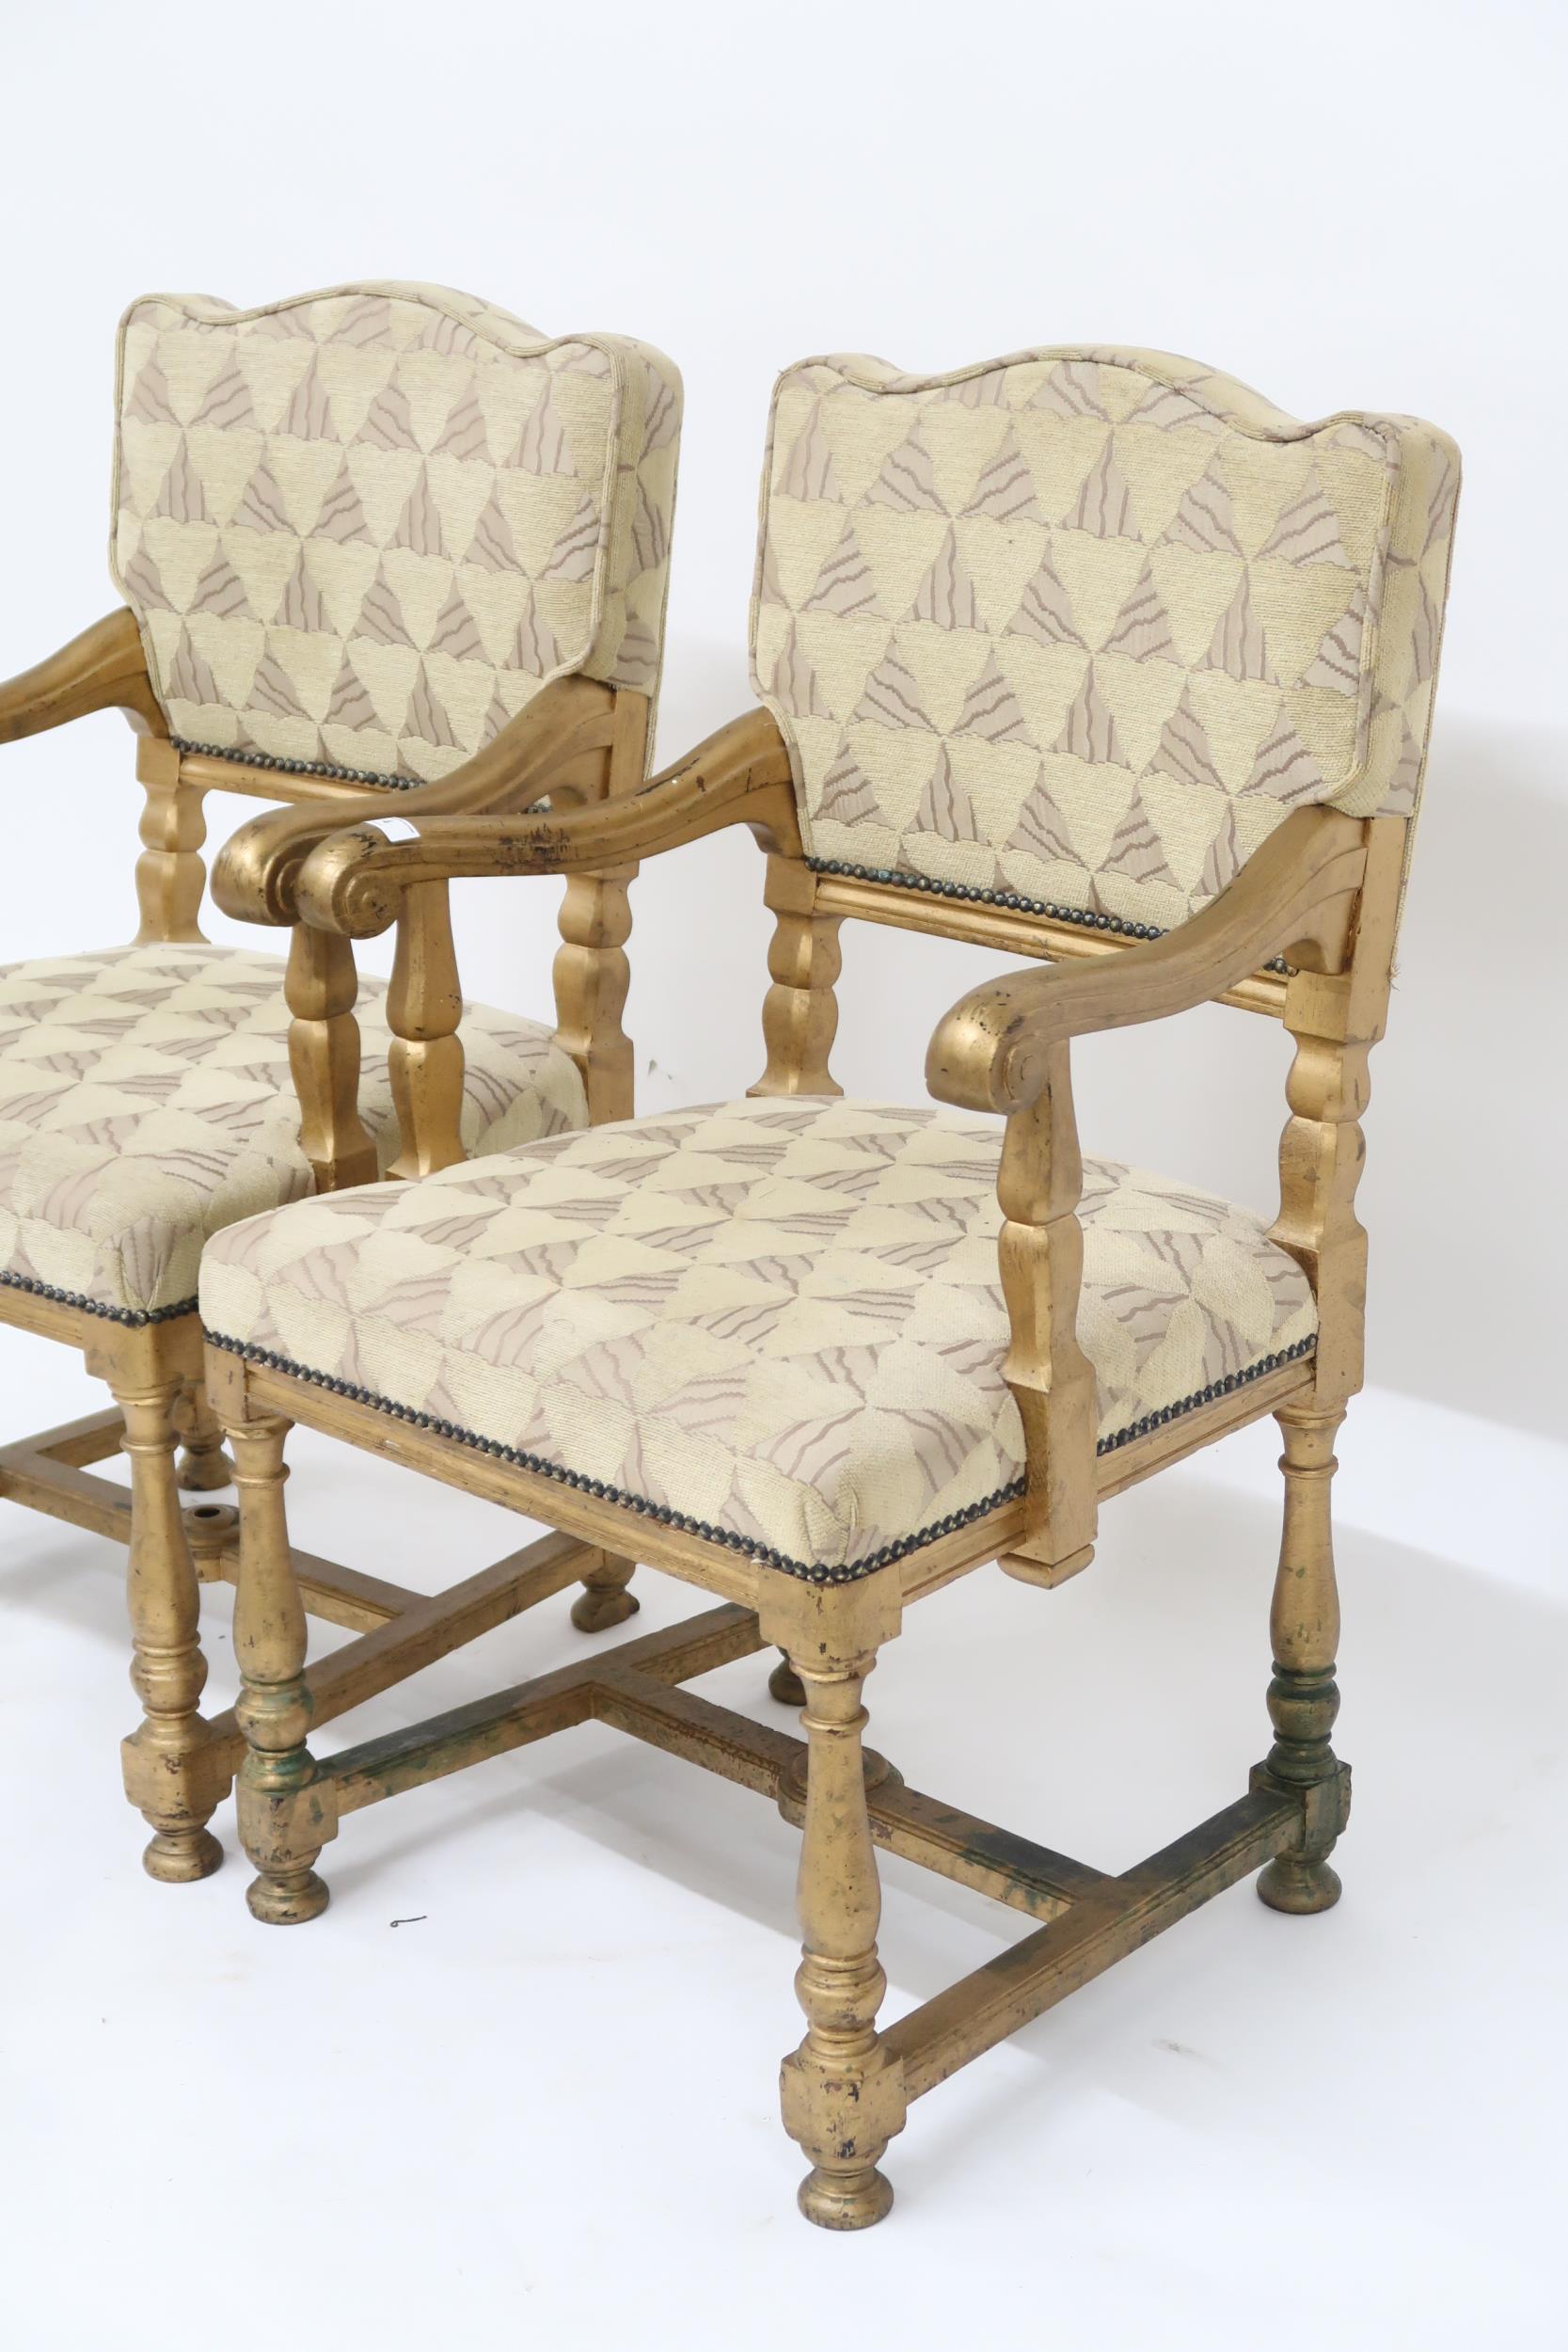 A pair of early 20th century gilt framed theatre seats with beige geometric upholstery, scrolled - Image 2 of 2